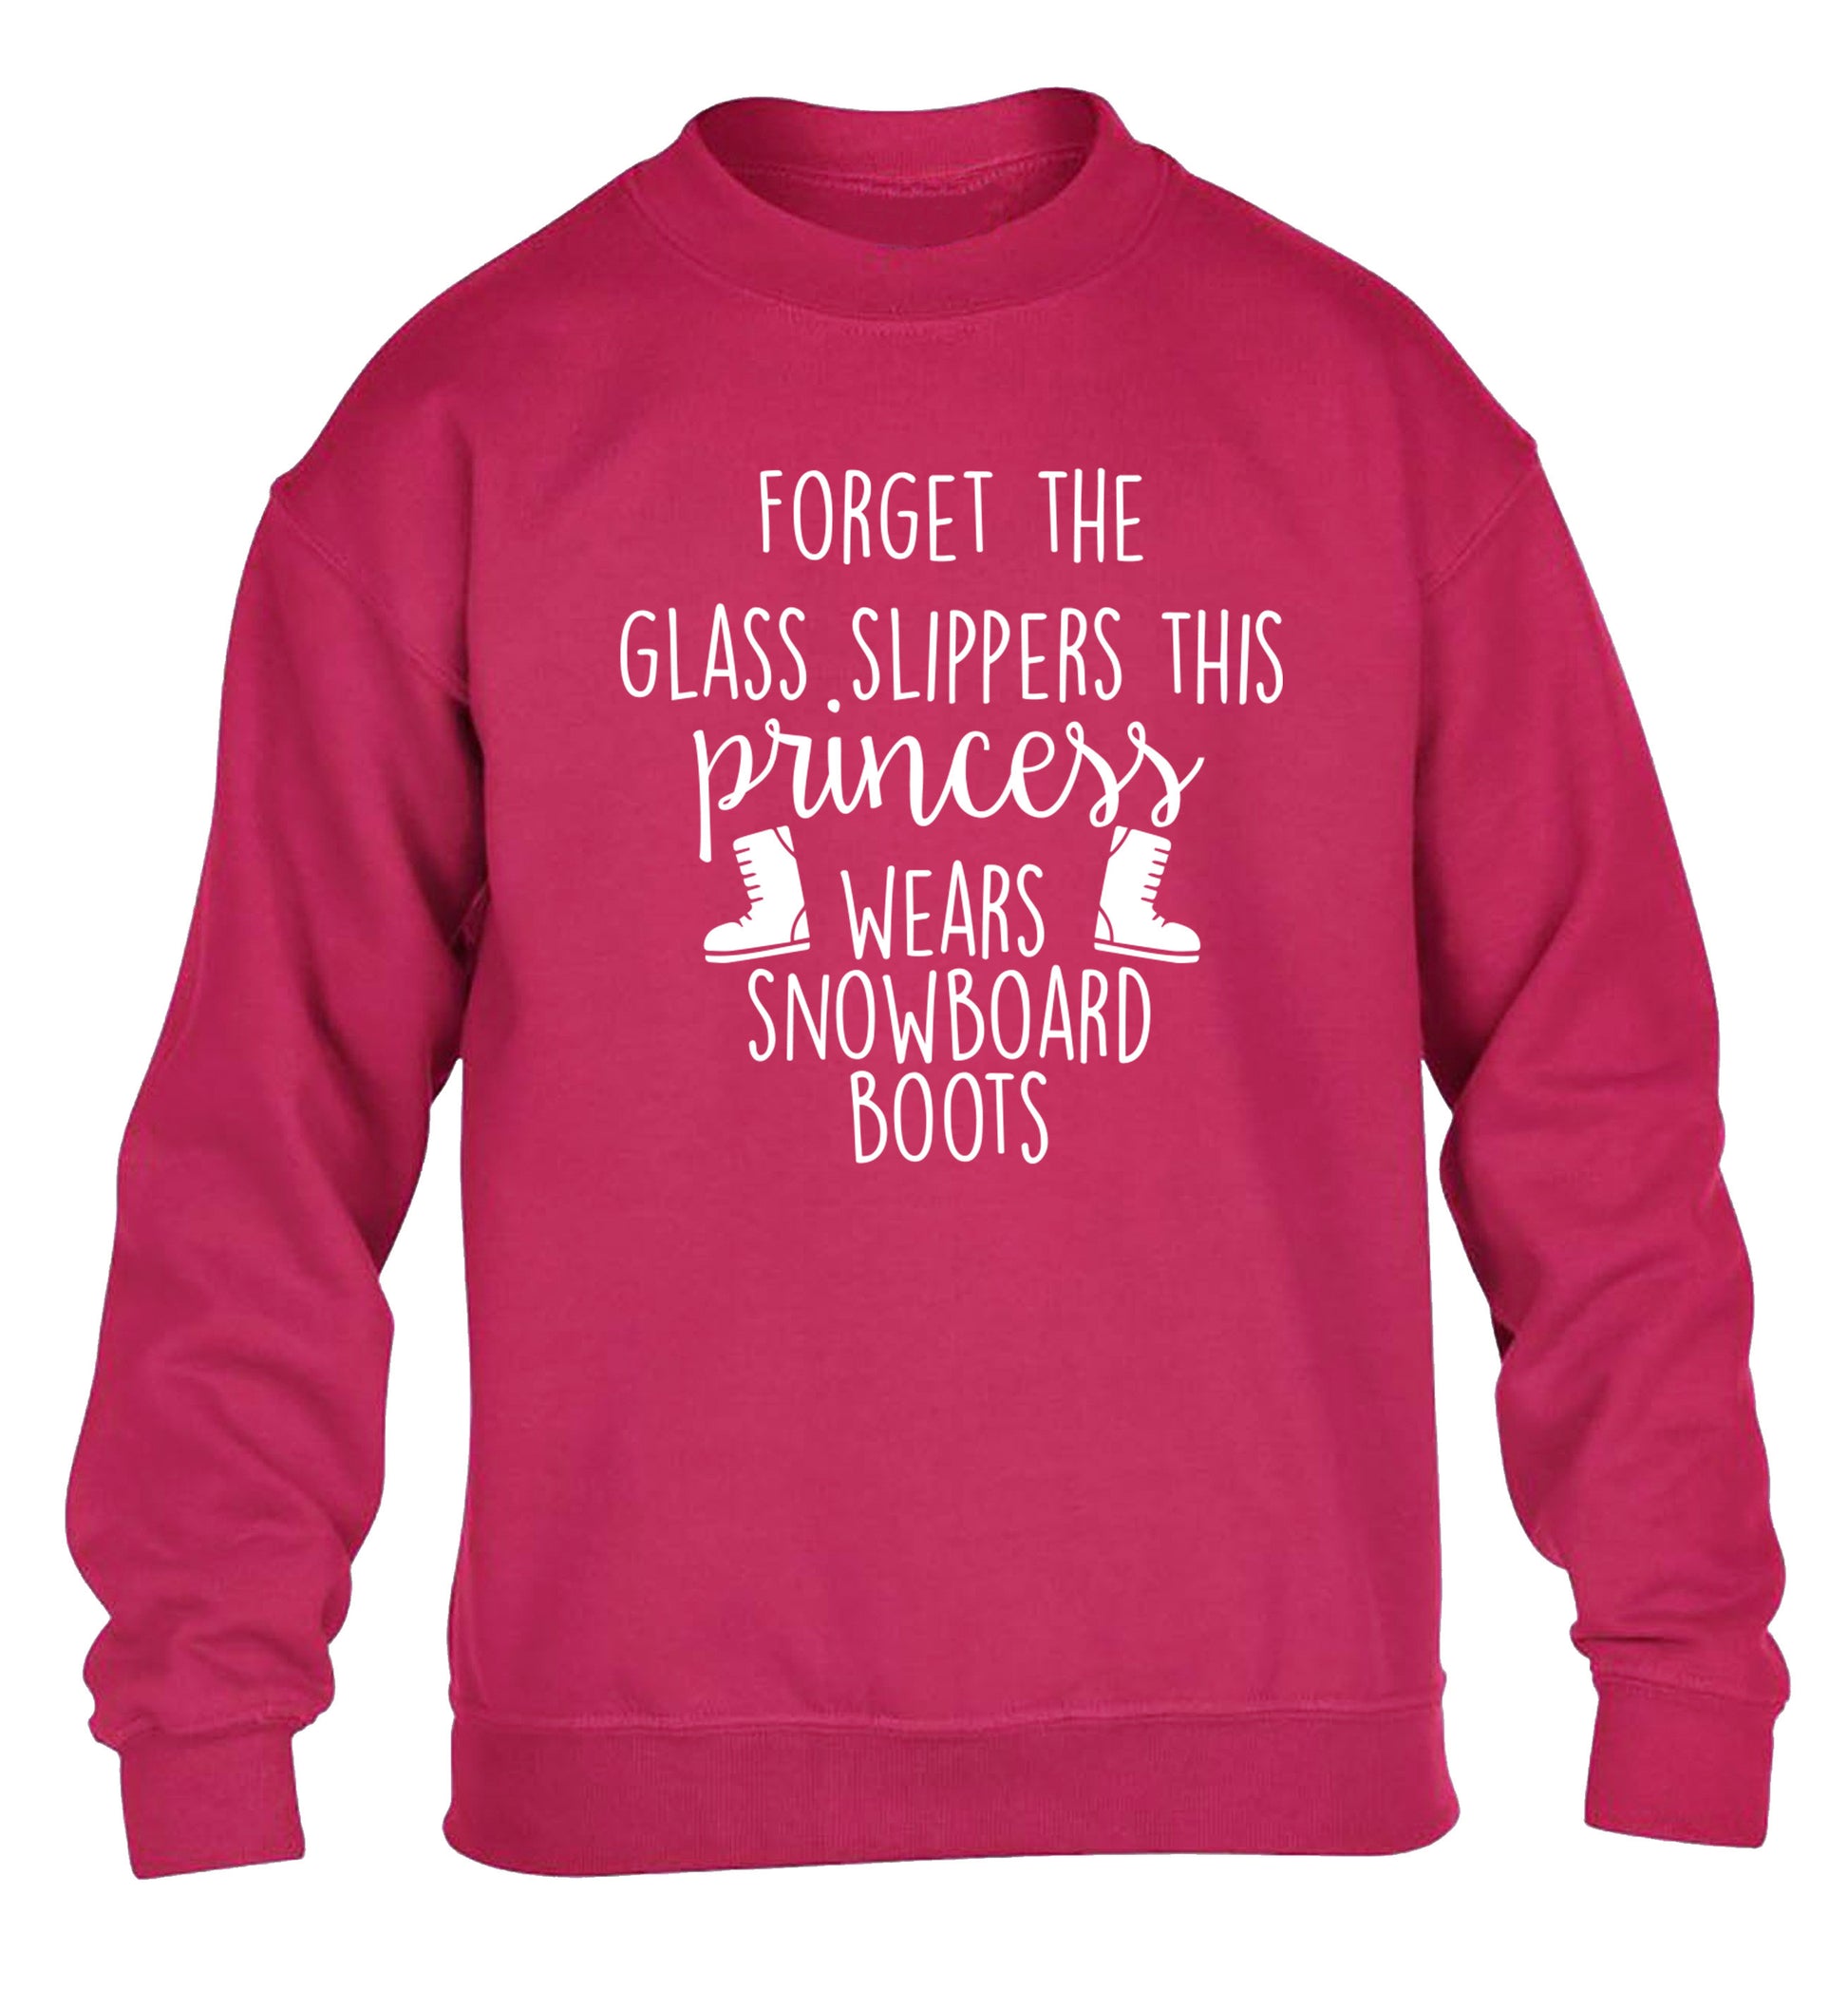 Forget the glass slippers this princess wears snowboard boots children's pink sweater 12-14 Years